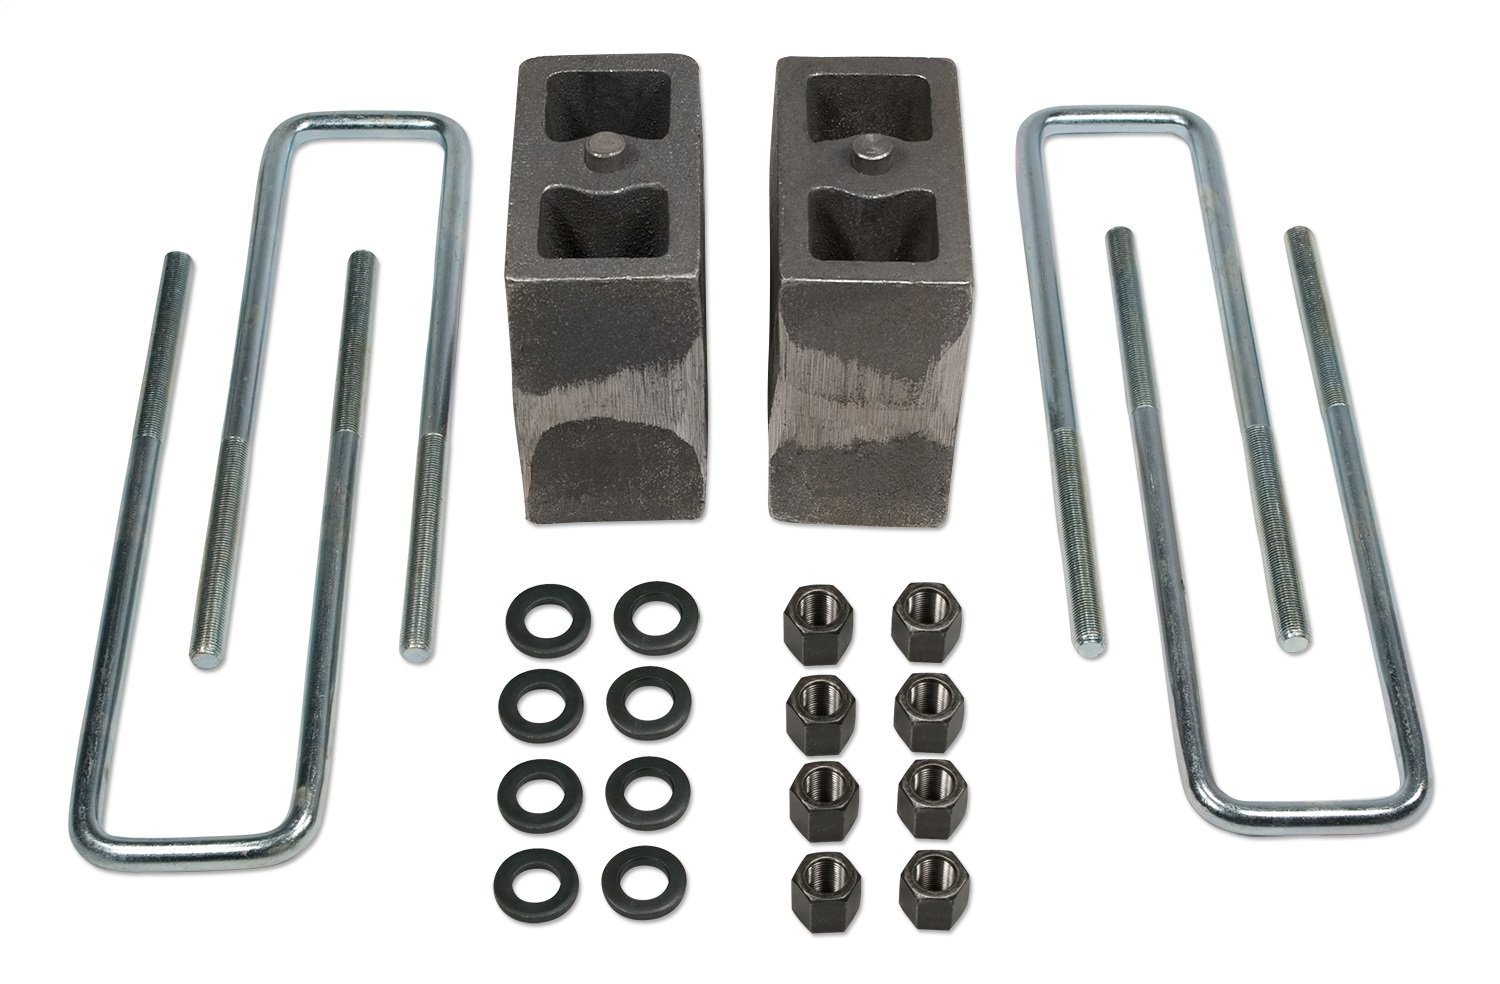 Axle Lift Blocks Kit 5.5 in. H x 3 in. W x 5.5 in. L Tapered w/o Contact Ovrld Incl. U-Bolts Repl Fact Blks On Veh Equipd w/Them